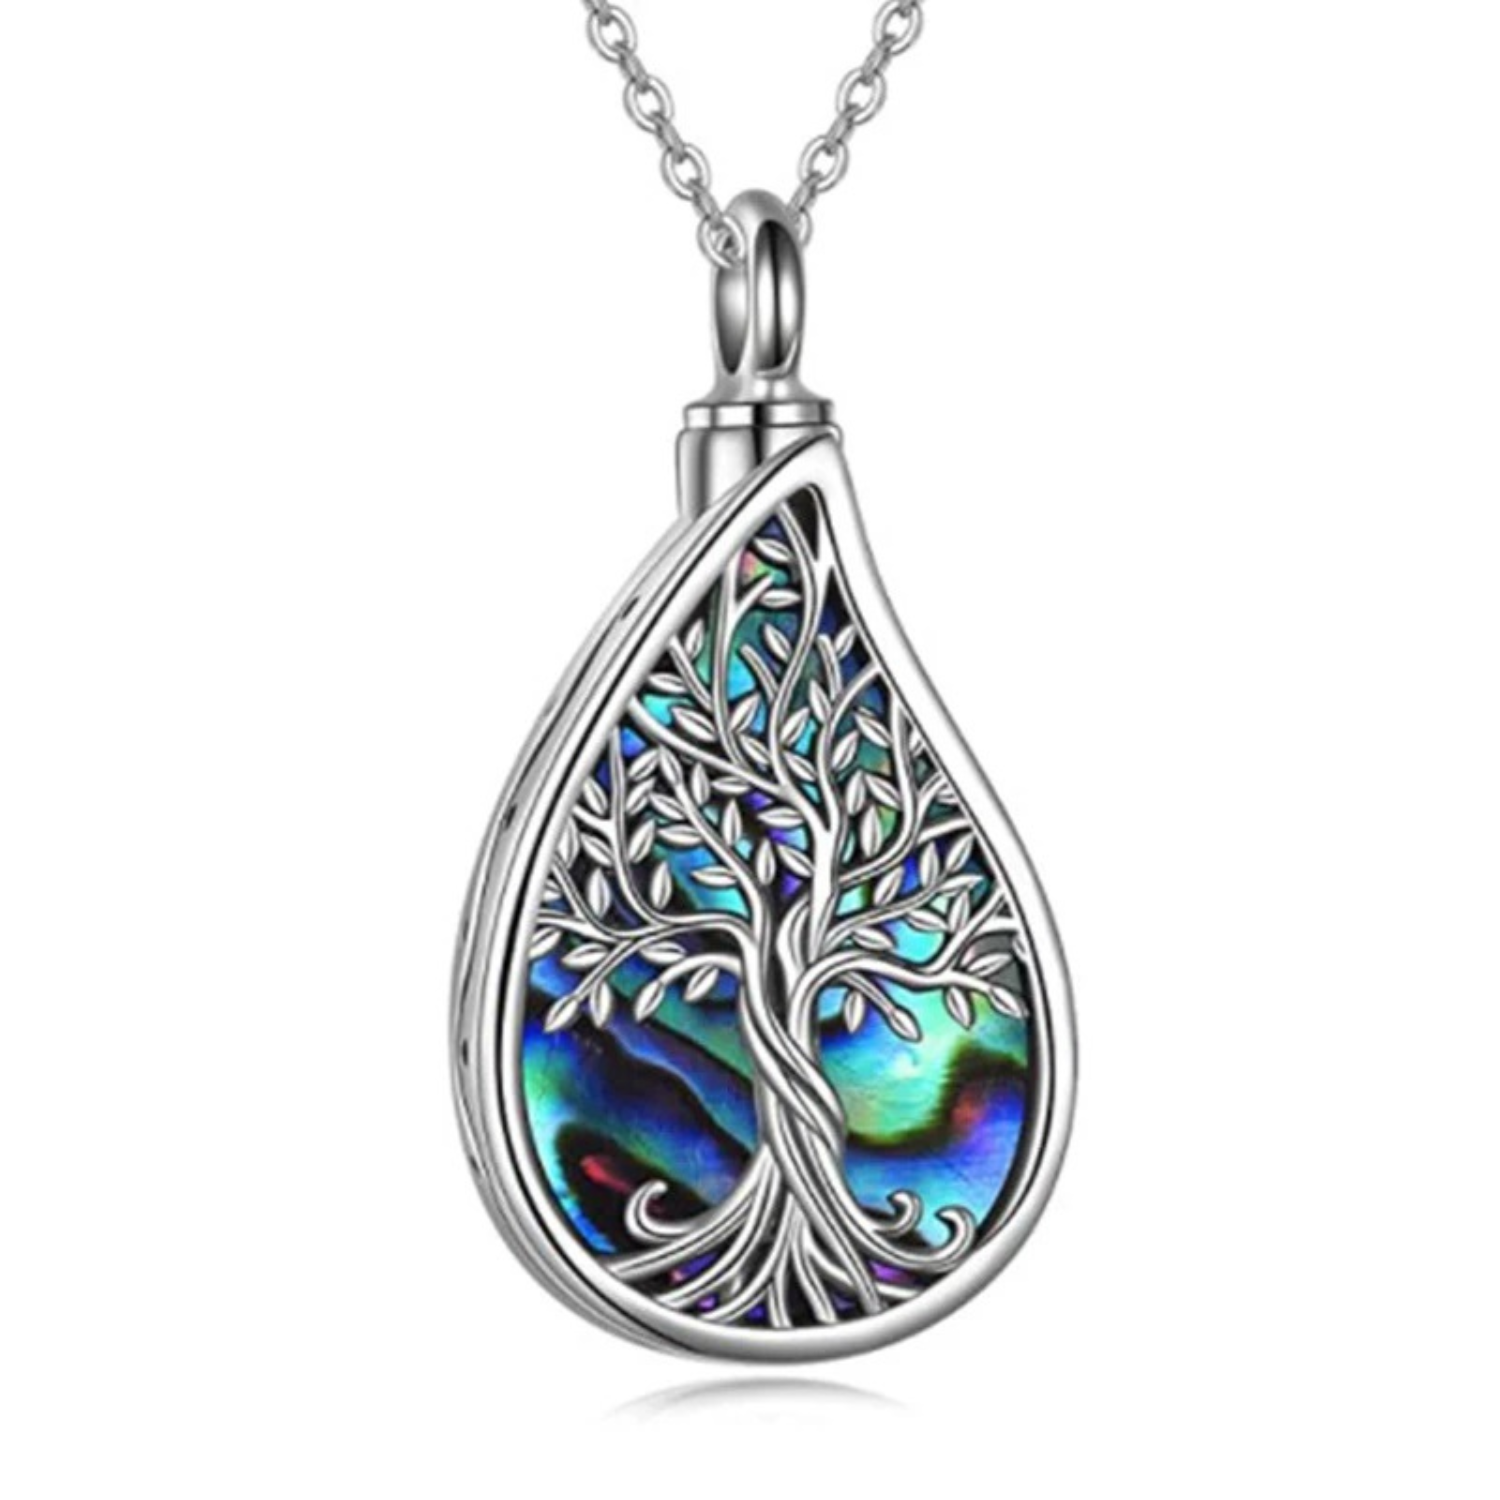 Maya's Grace Urn Necklaces for Ashes Tree of Life Pendant Abalone Shell Tree of Life Cremation Jewelry for Ashes Memory Silver Necklace Jewelry for Women